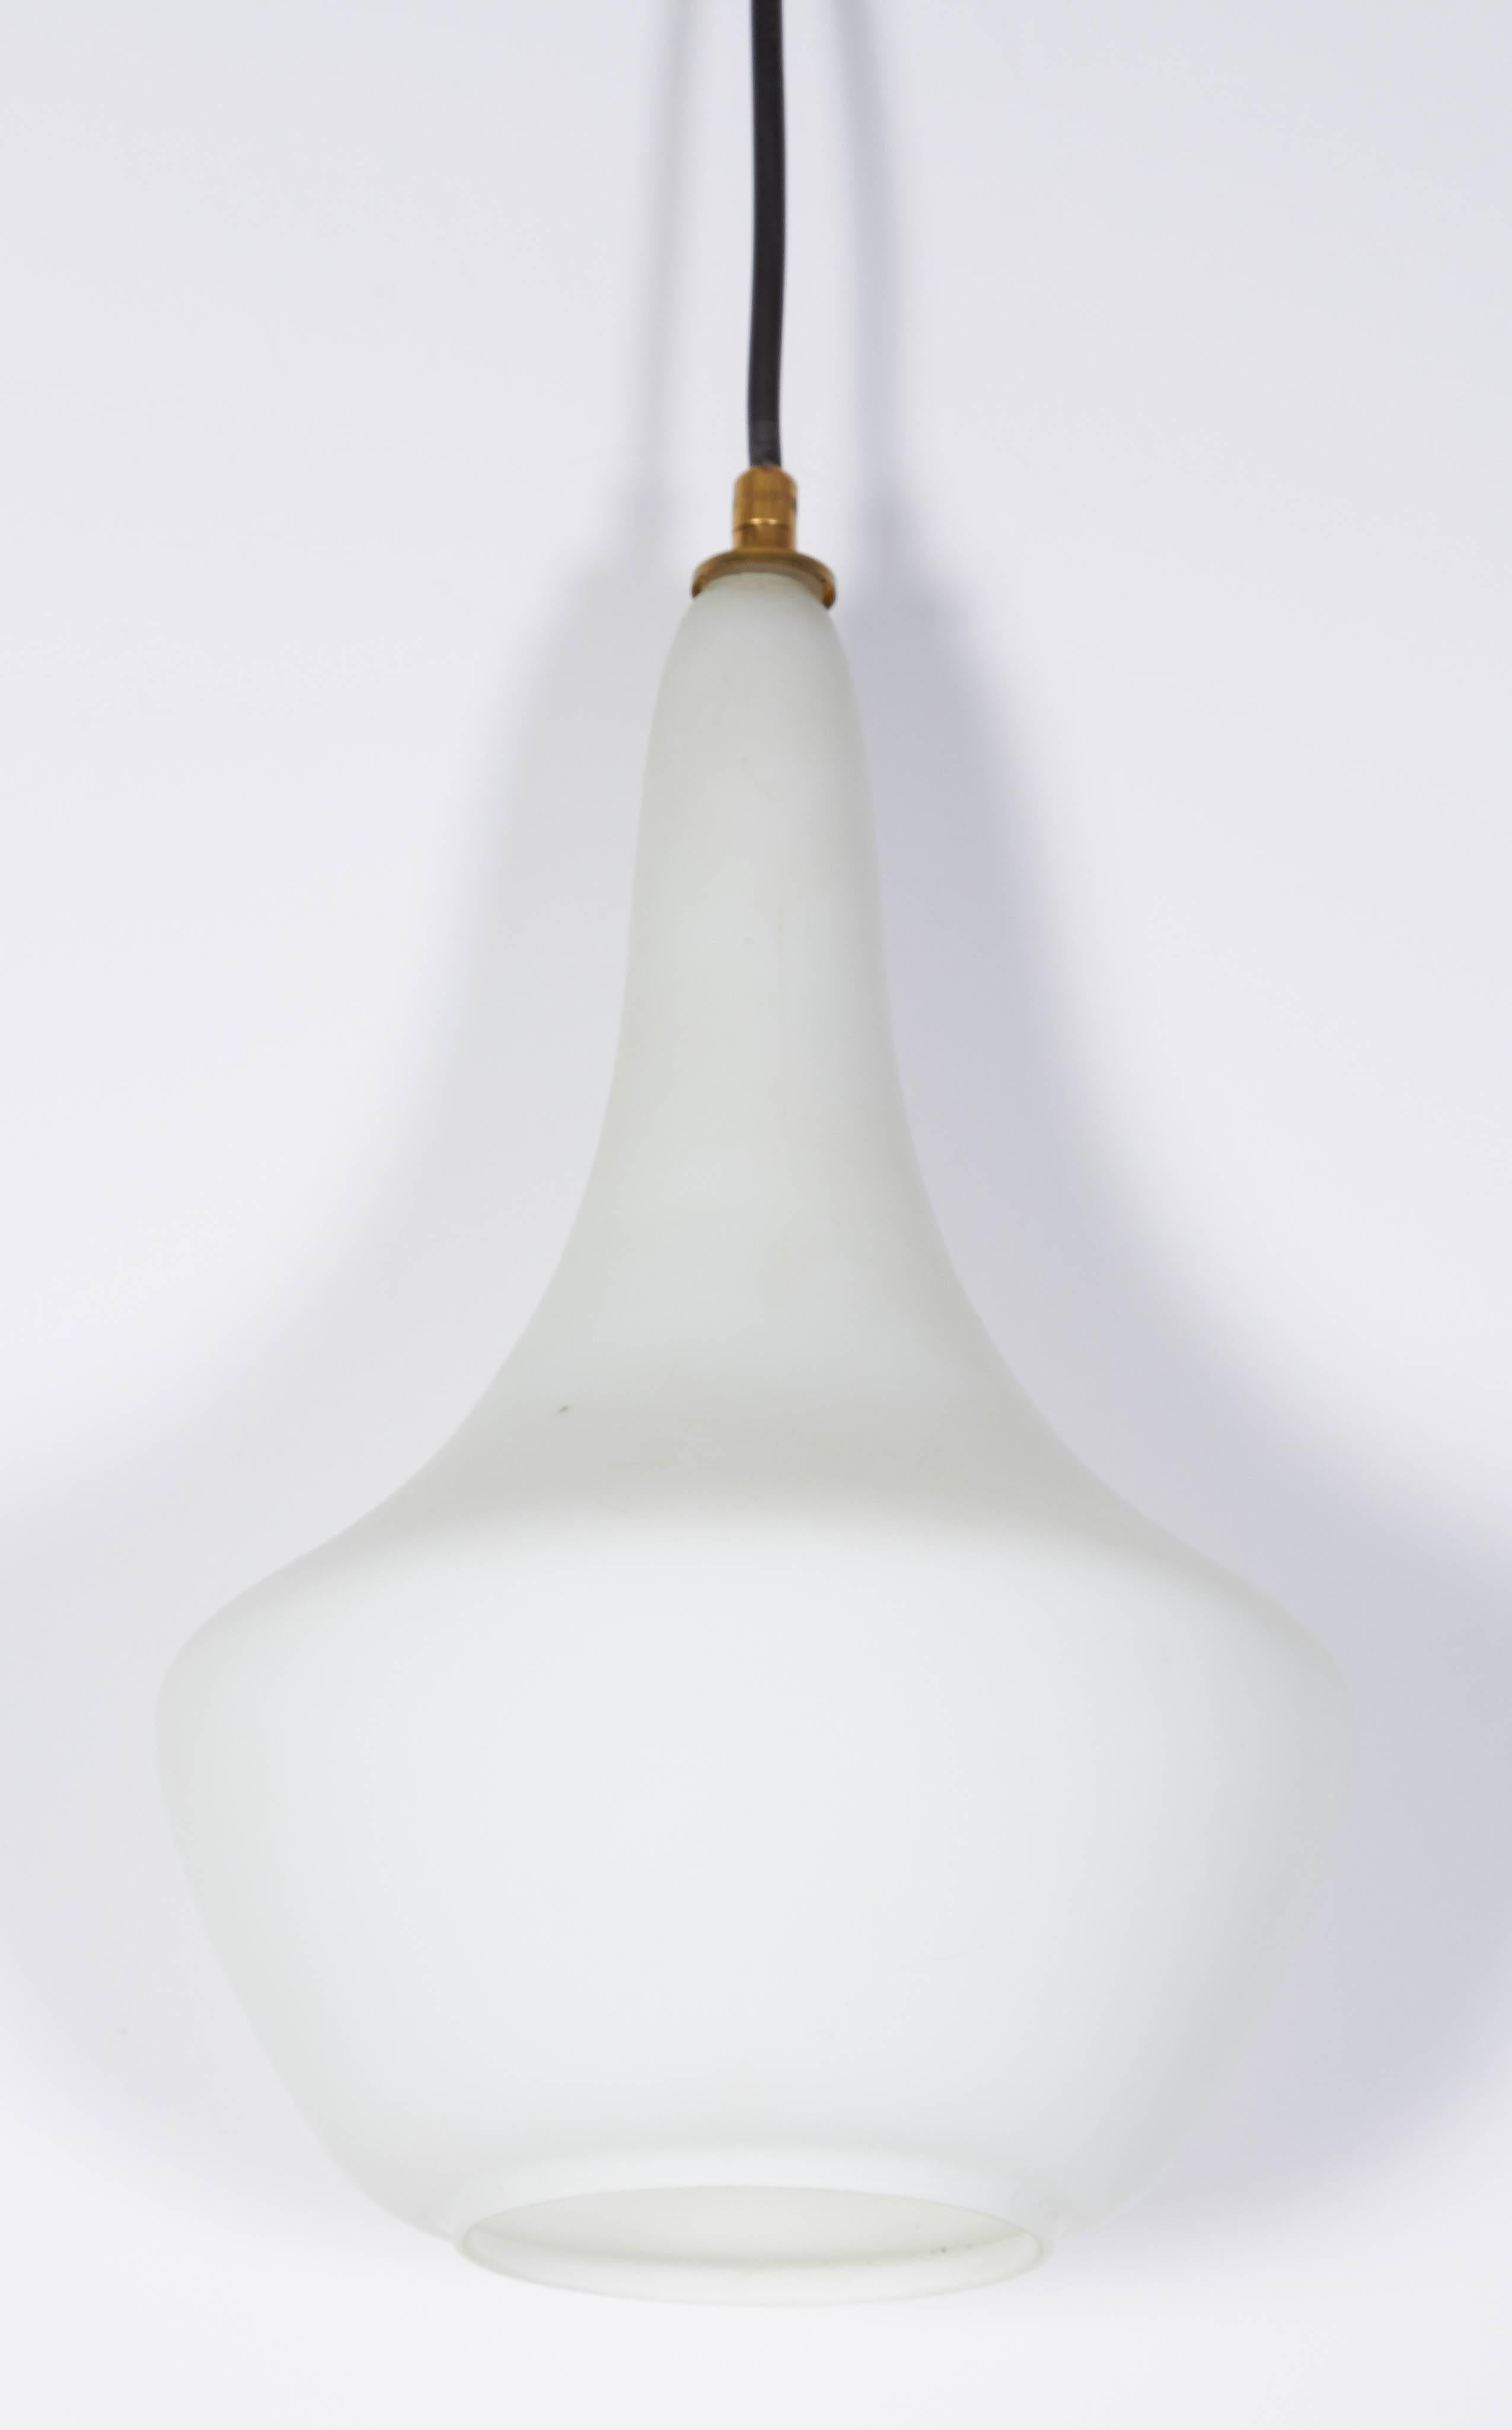 One of a group of Italian handblown pendant light, circa 1950. Glass shade is layered with a clear satin finished over white in a tear drop shape. Holds one standard light bulb. Shade is 8